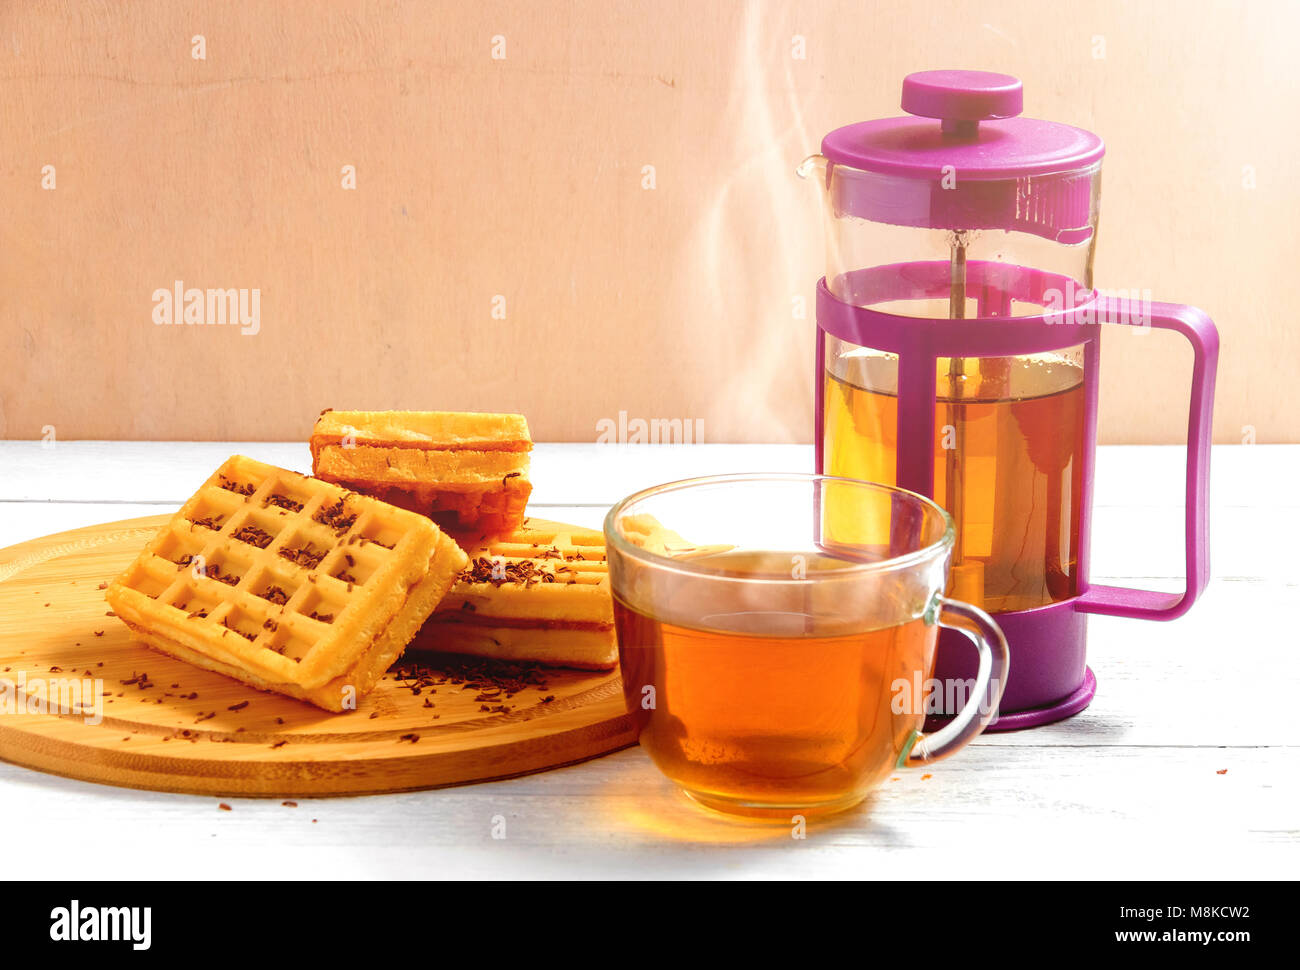 Homemade waffles with jam on old wooden table. Wafers with cup of tea with teapot. Stock Photo